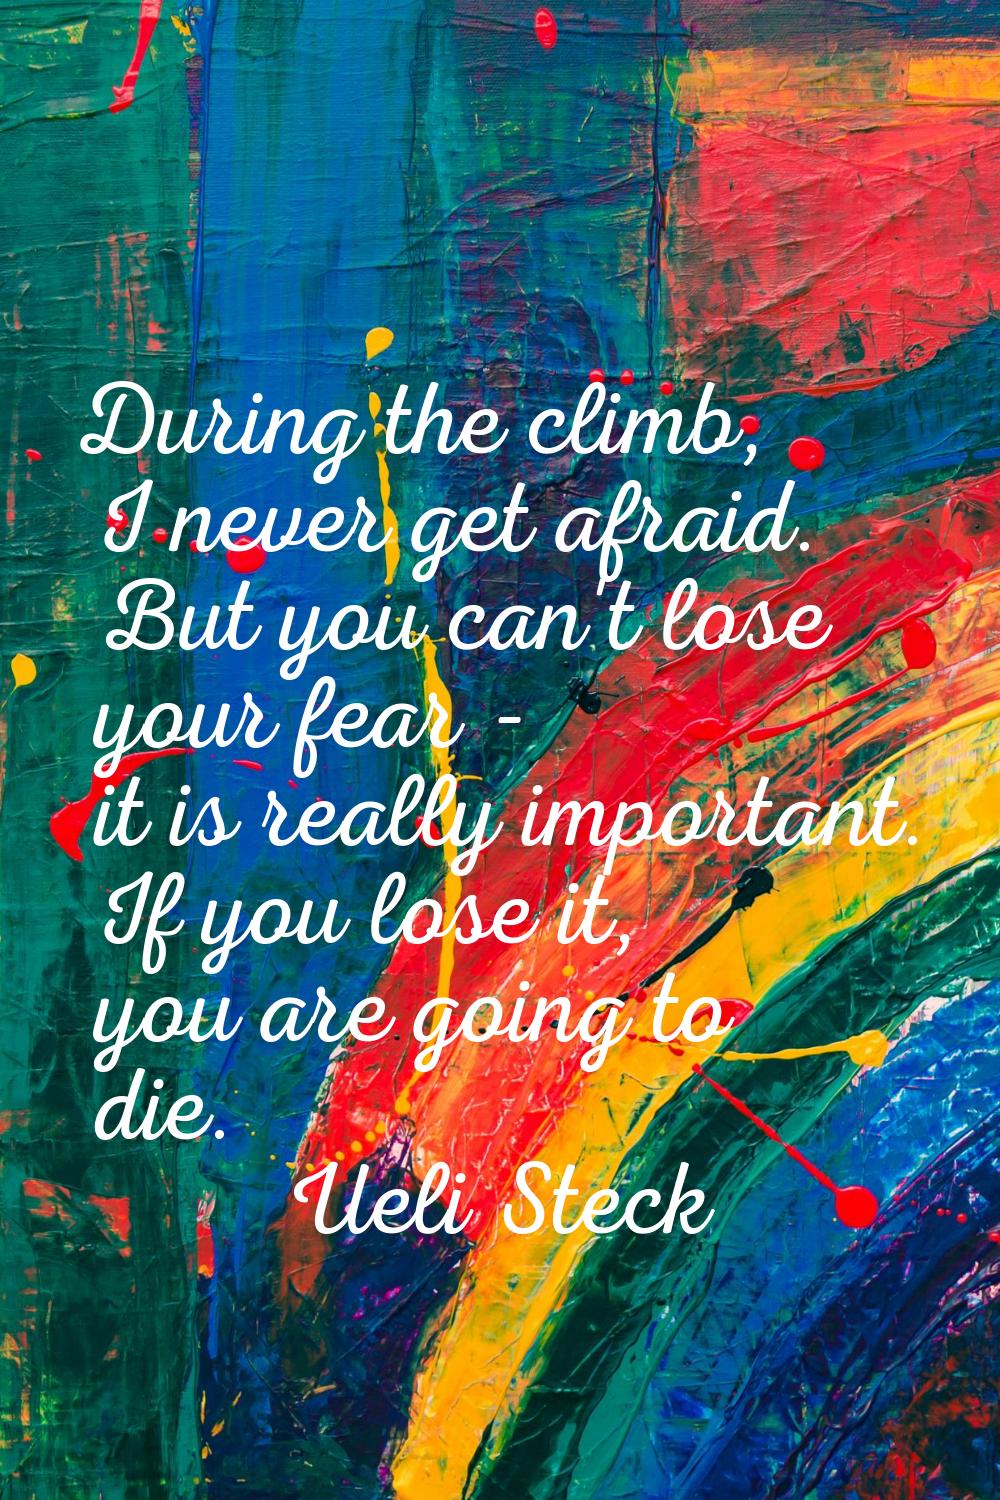 During the climb, I never get afraid. But you can't lose your fear - it is really important. If you